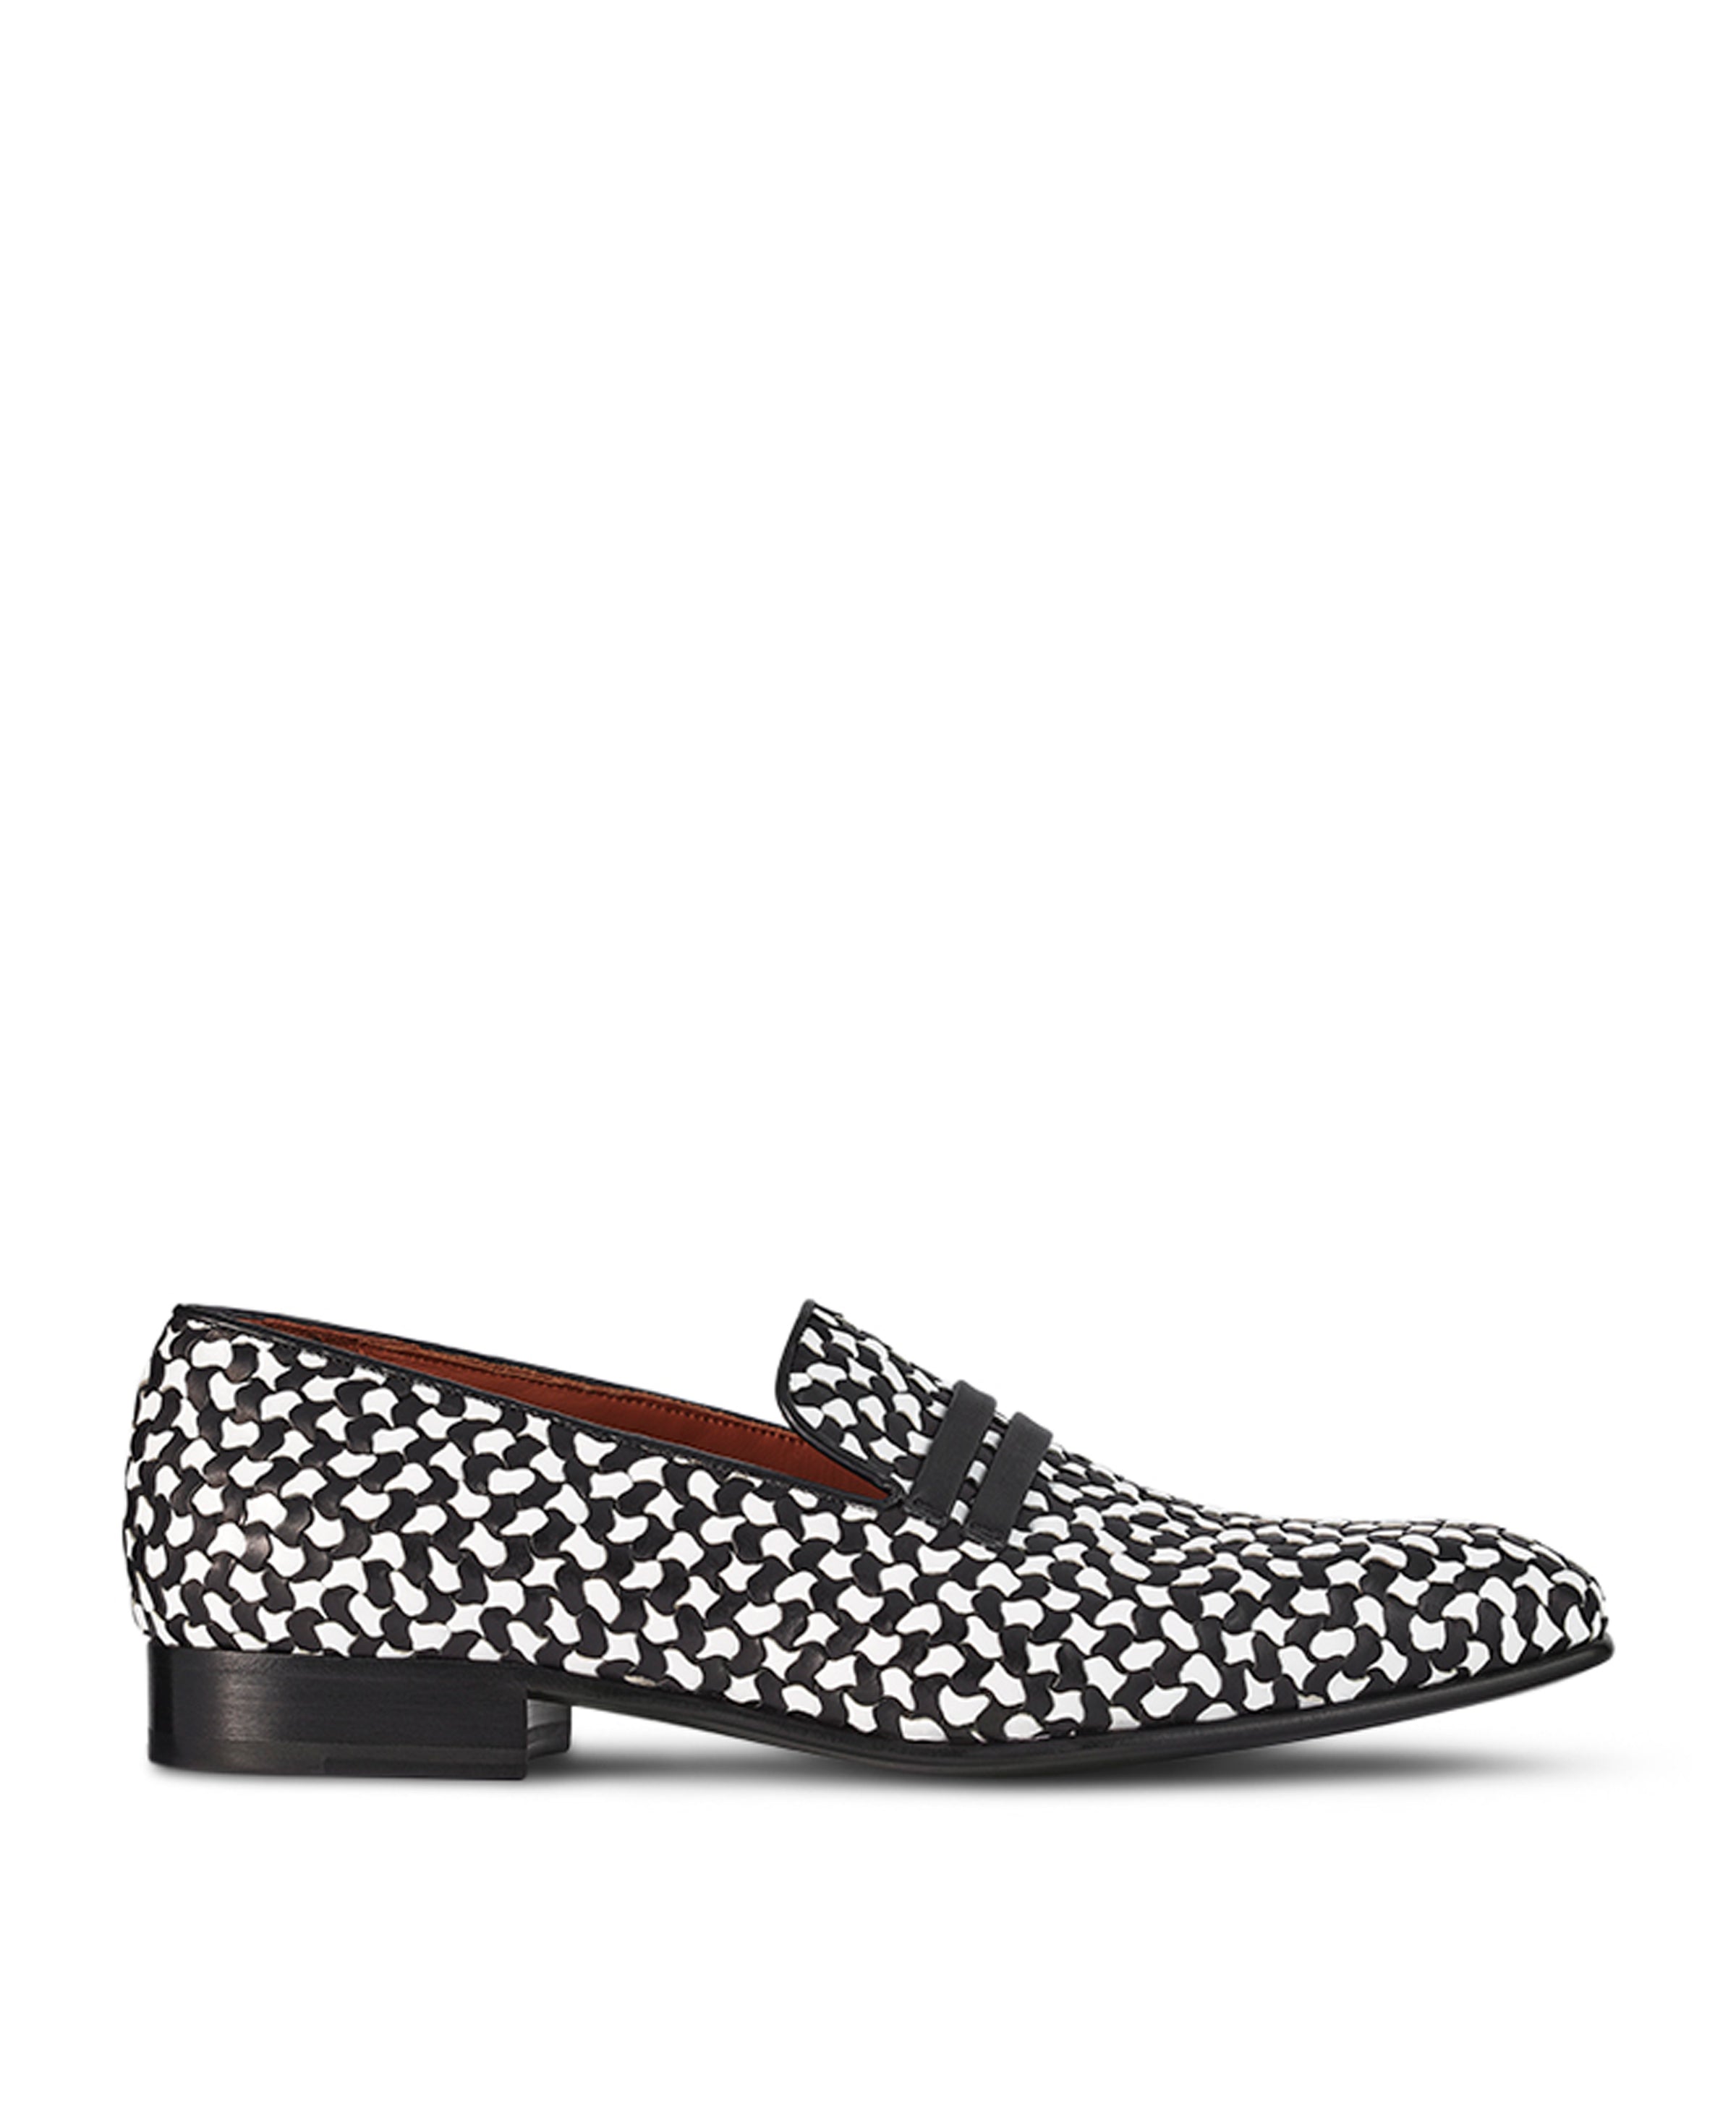 Miles Black and White Loafers: Men's Designer Shoes | Malone Souliers